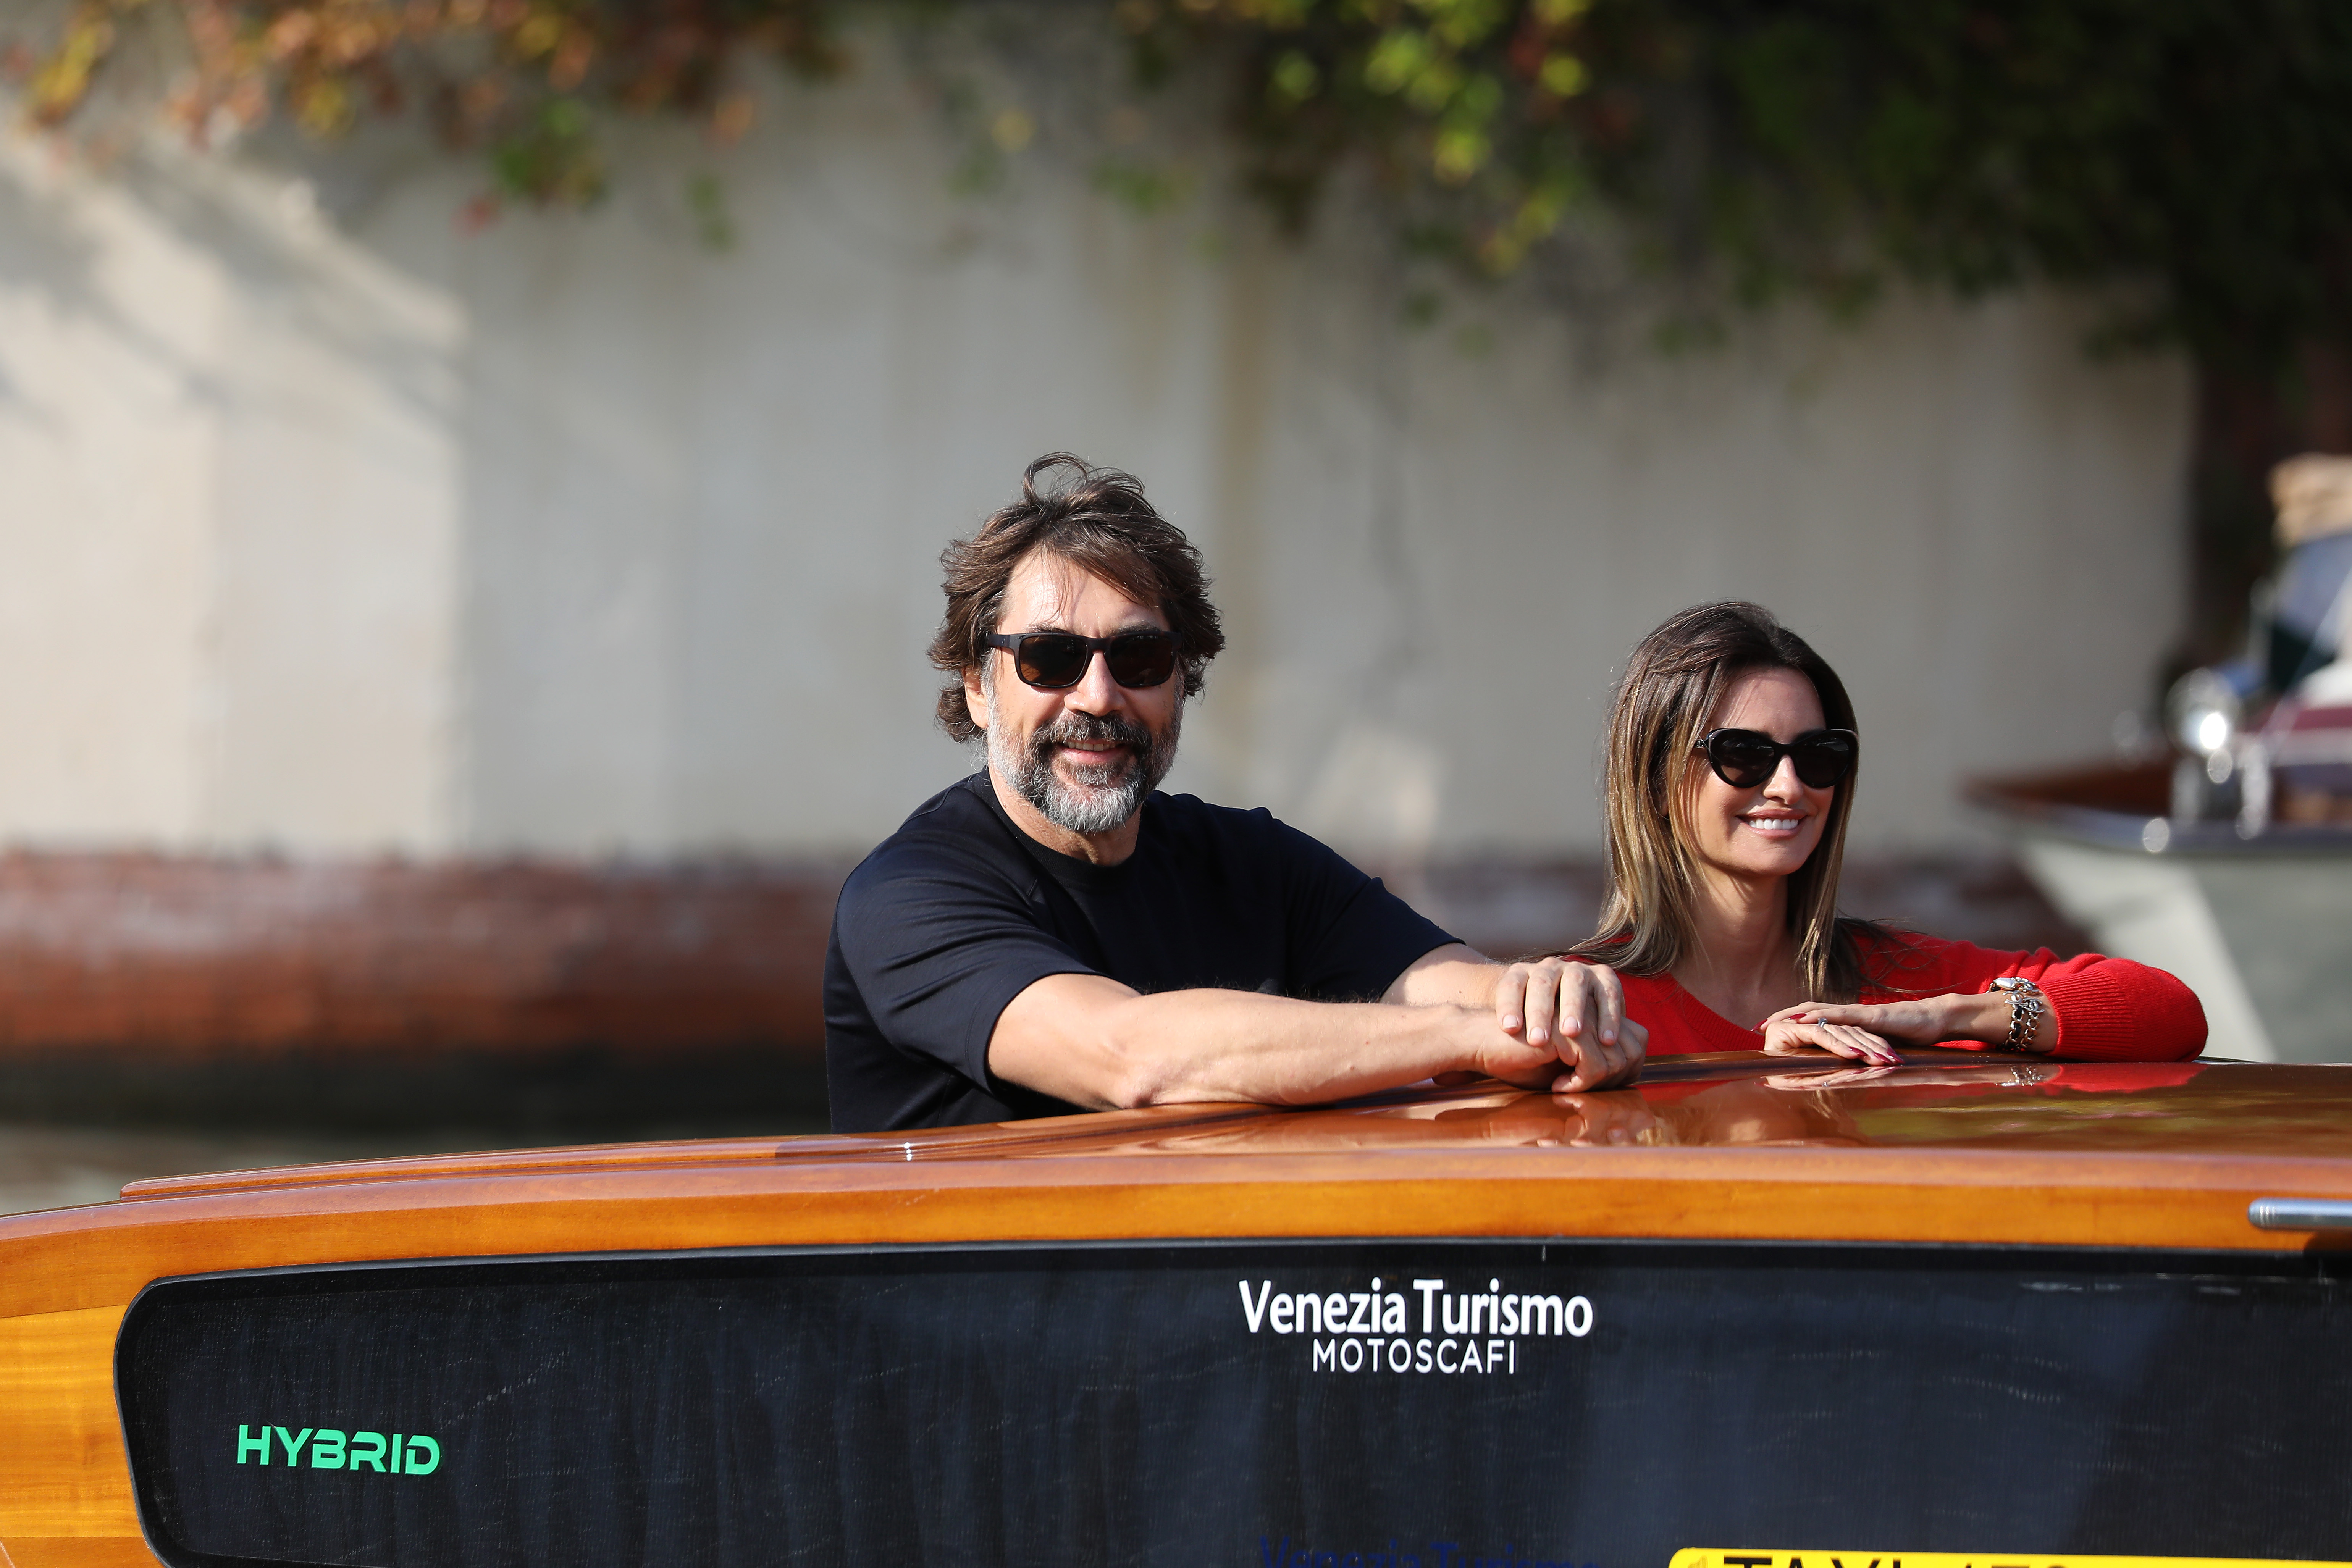 Javier Bardem and Penélope Cruz at the 78th Venice International Film Festival in Venice, Italy, on September 11, 2021 | Source: Getty Images